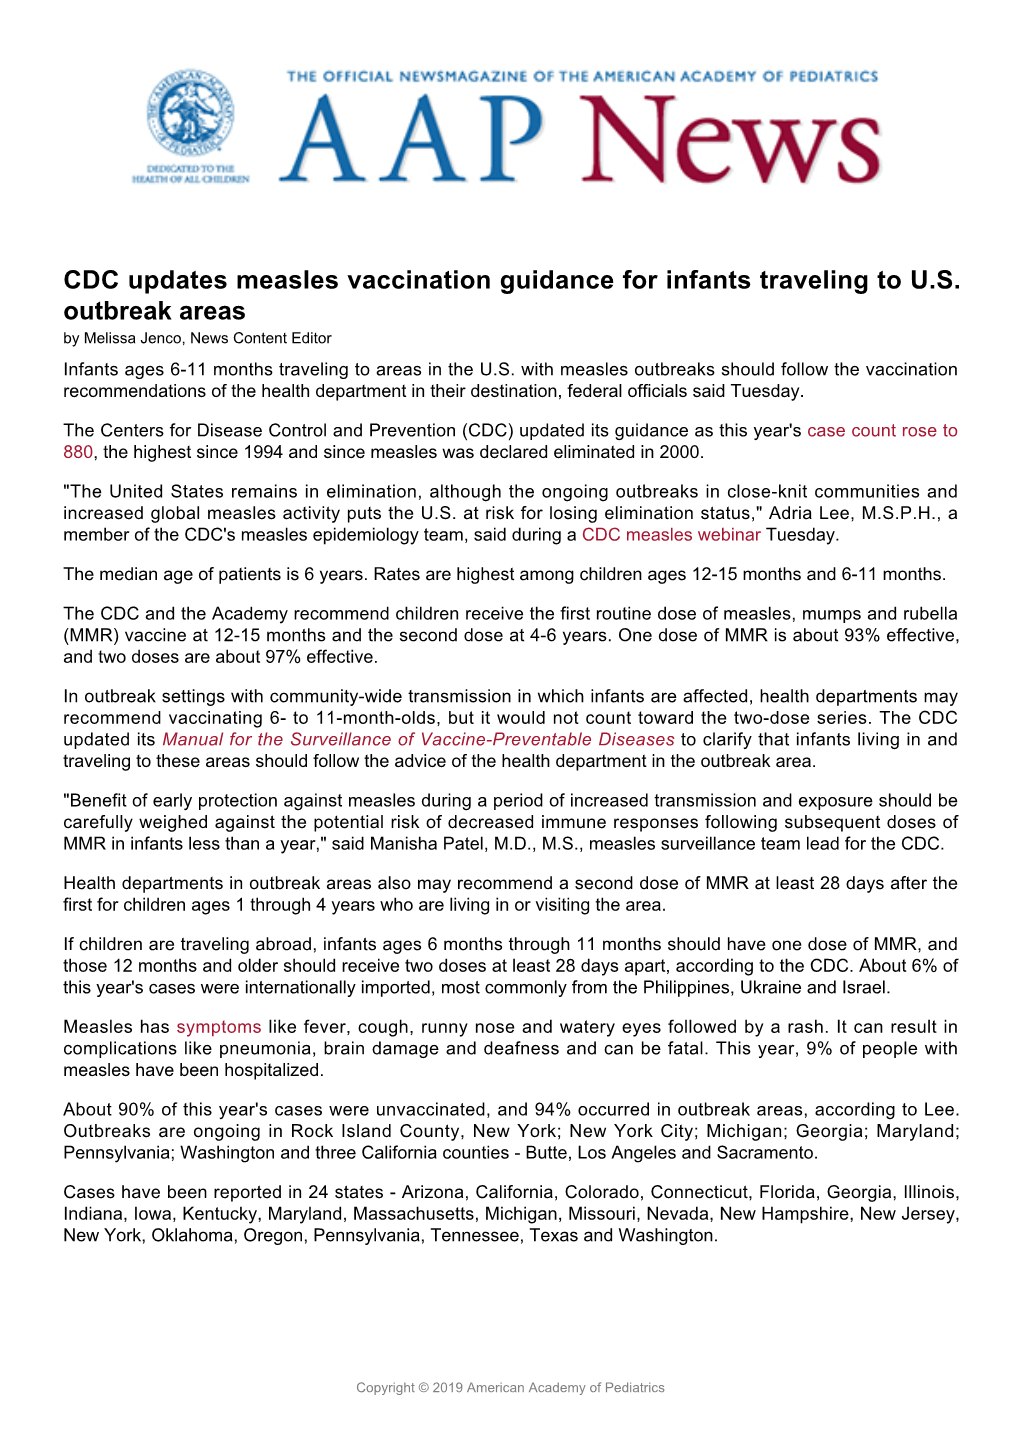 CDC Updates Measles Vaccination Guidance for Infants Traveling to U.S